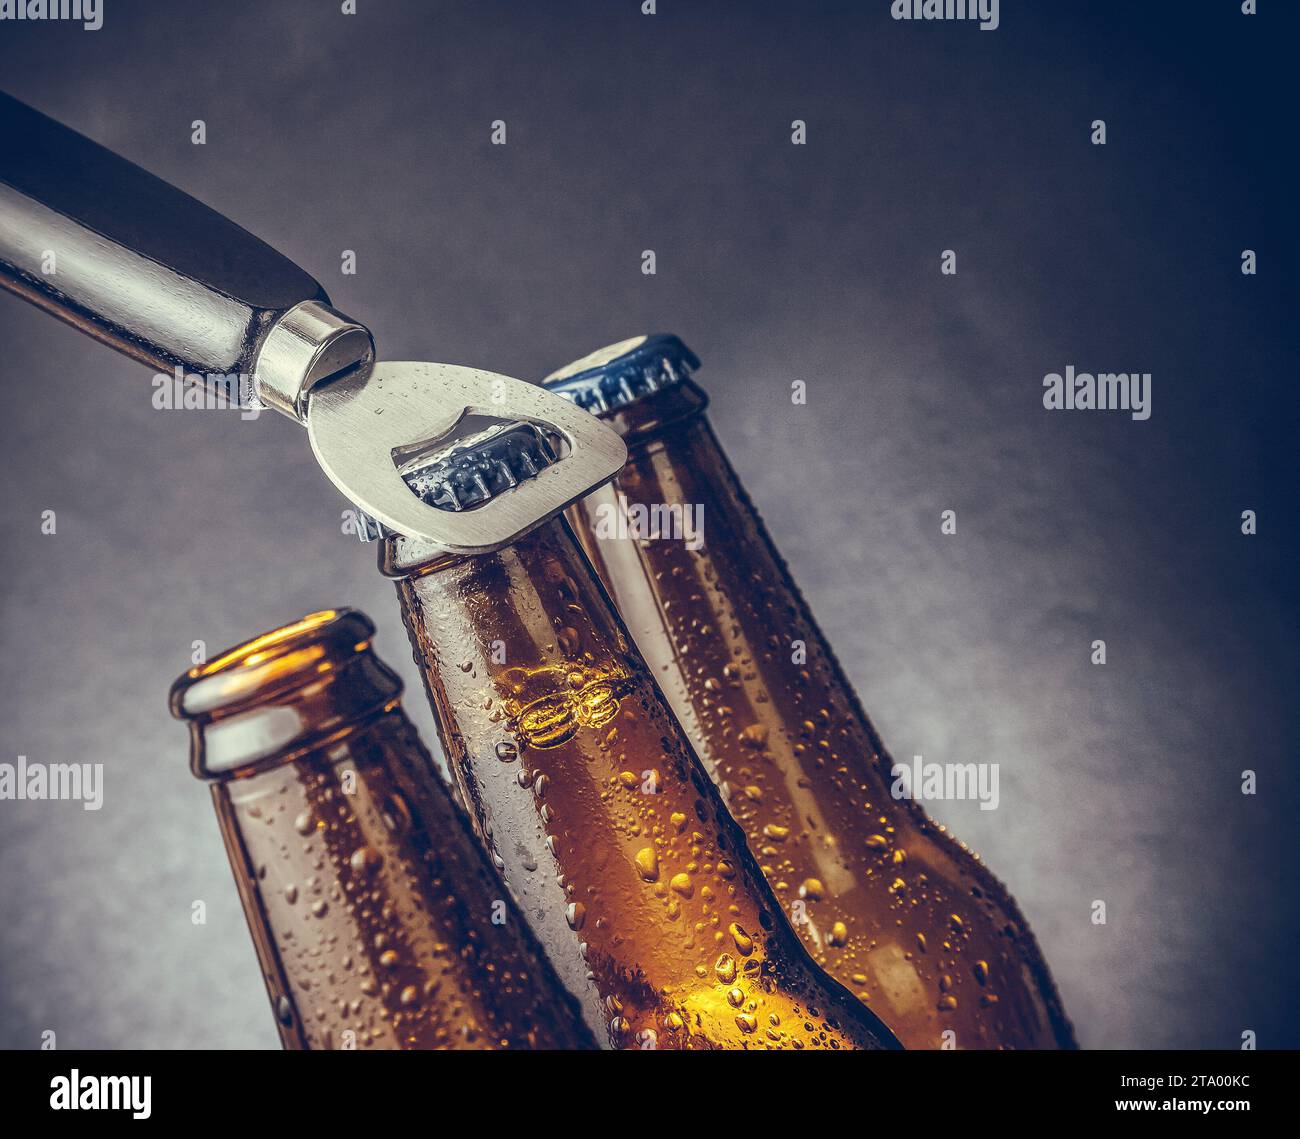 three fresh cold beer ale bottles with drops and stopper open with bottle opener on dark background Stock Photo